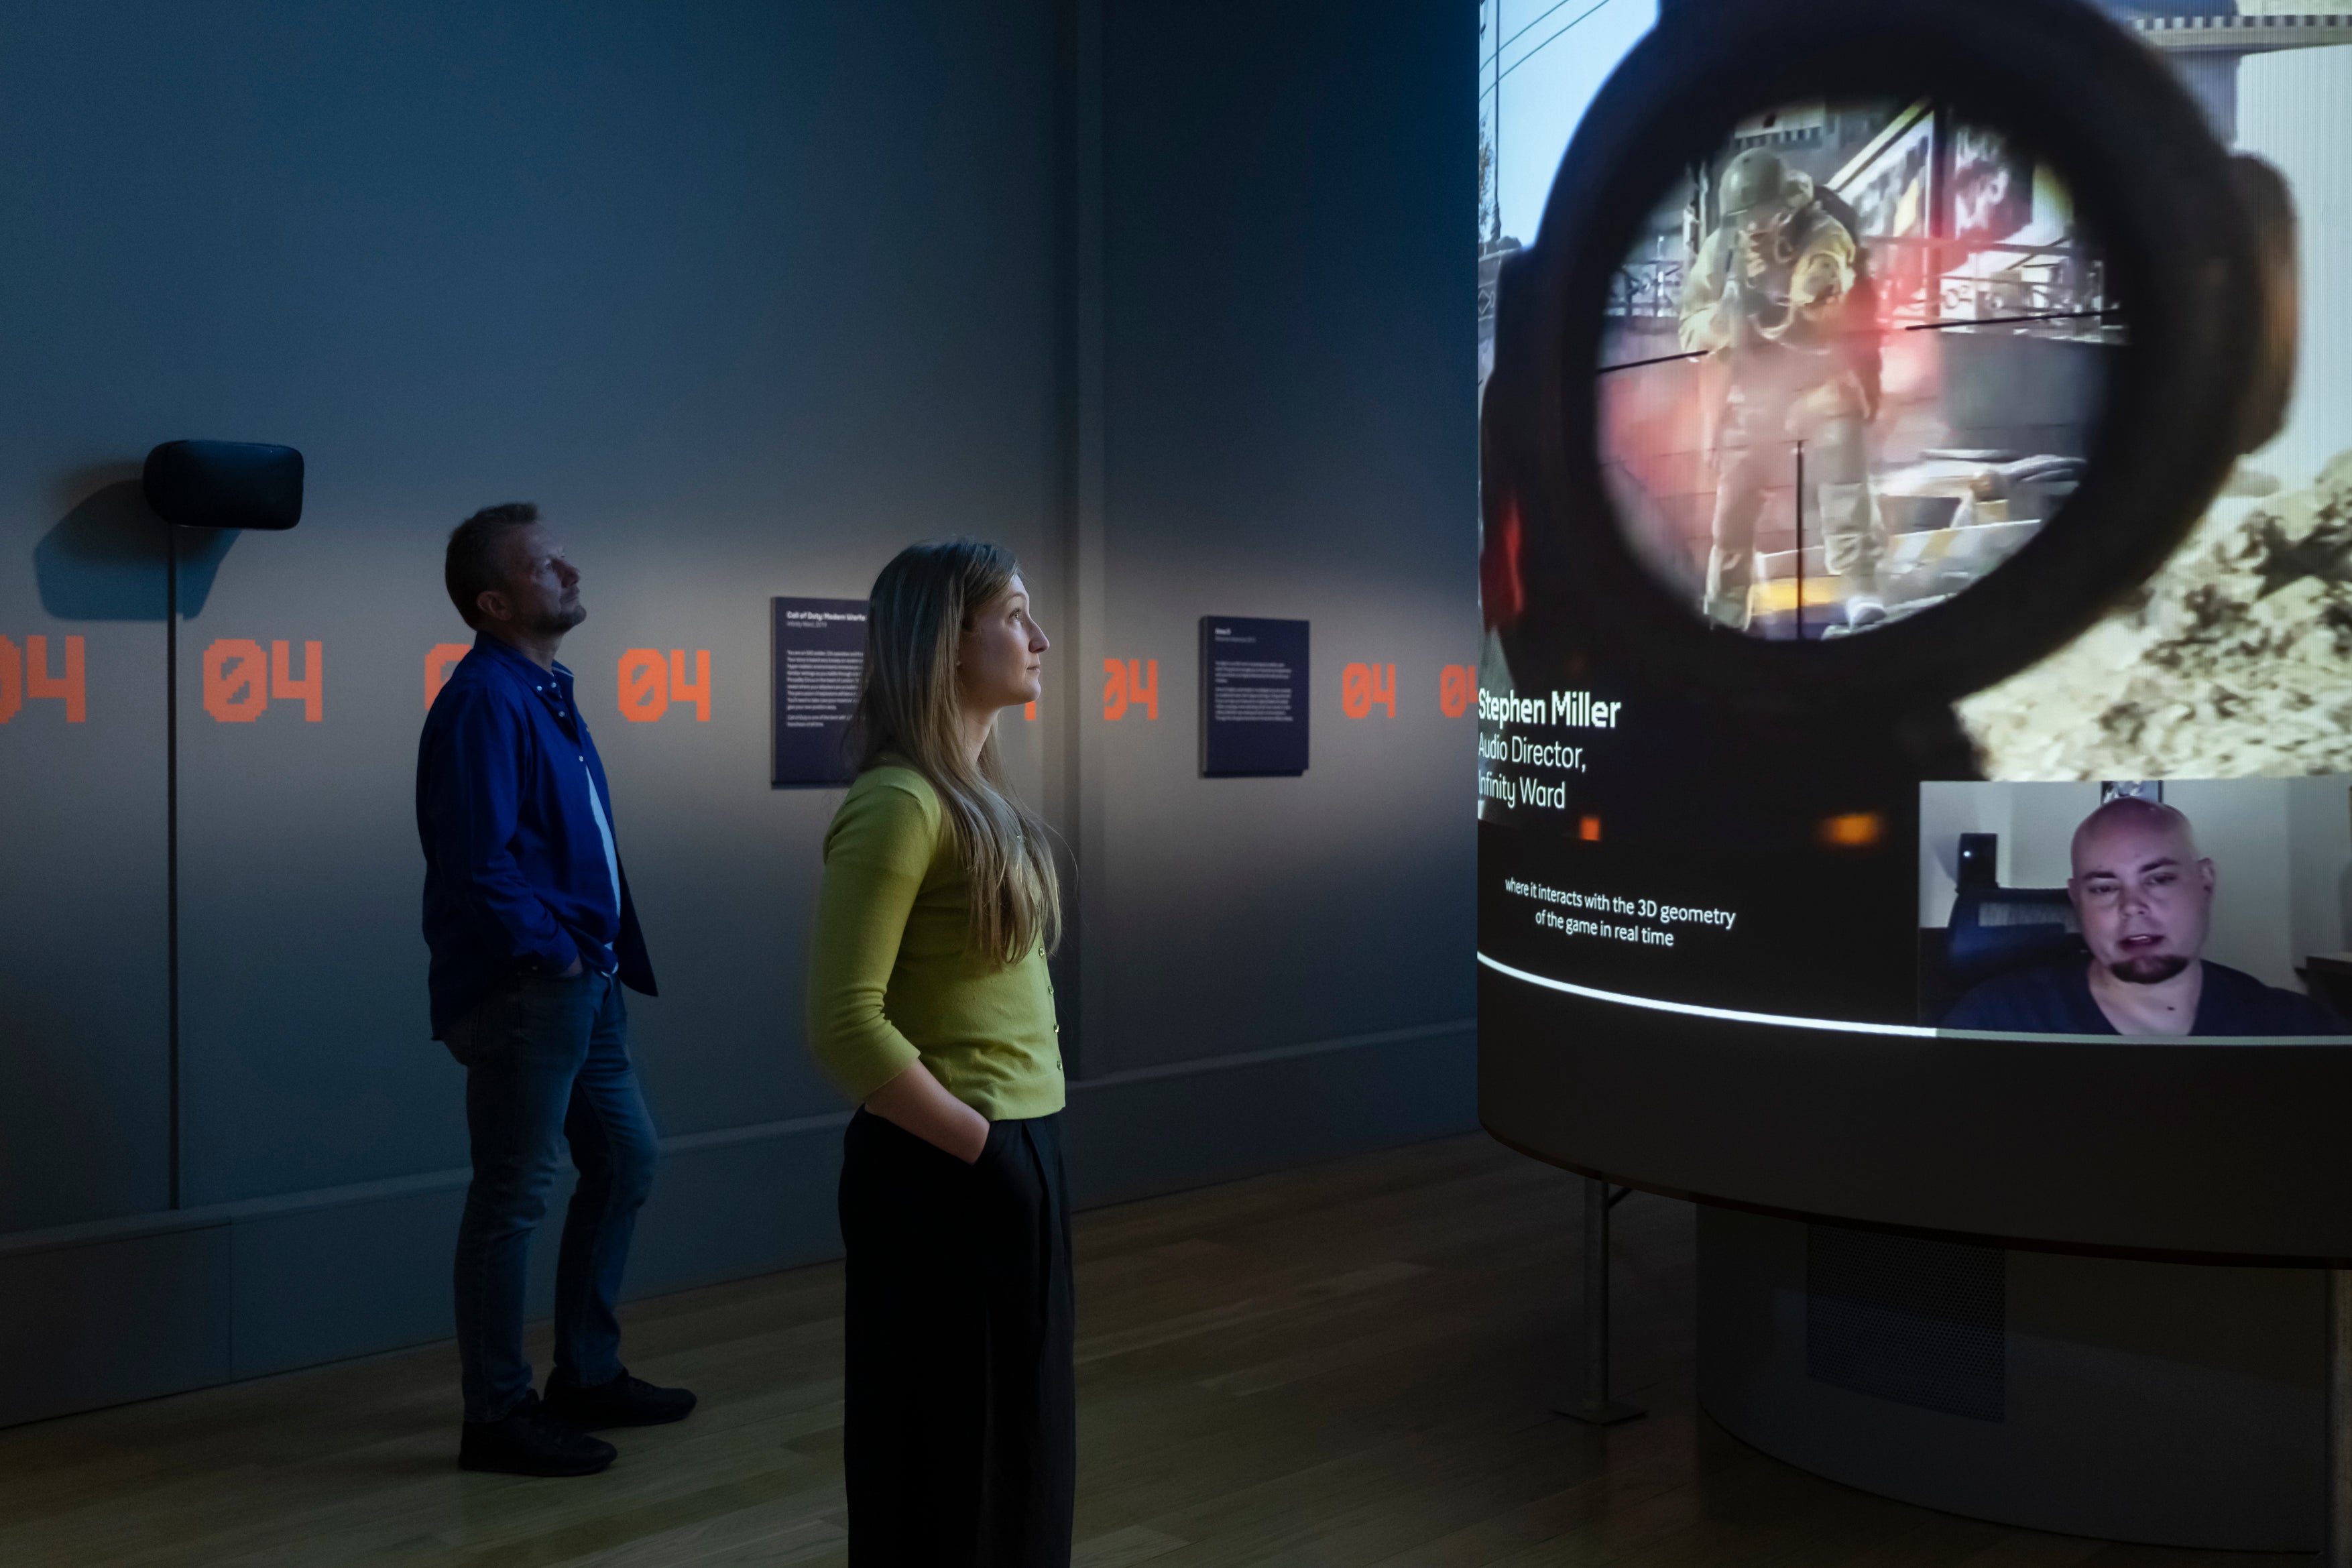 War Games: Real Conflicts is a UK exhibition exploring “what video games tell us about conflict”